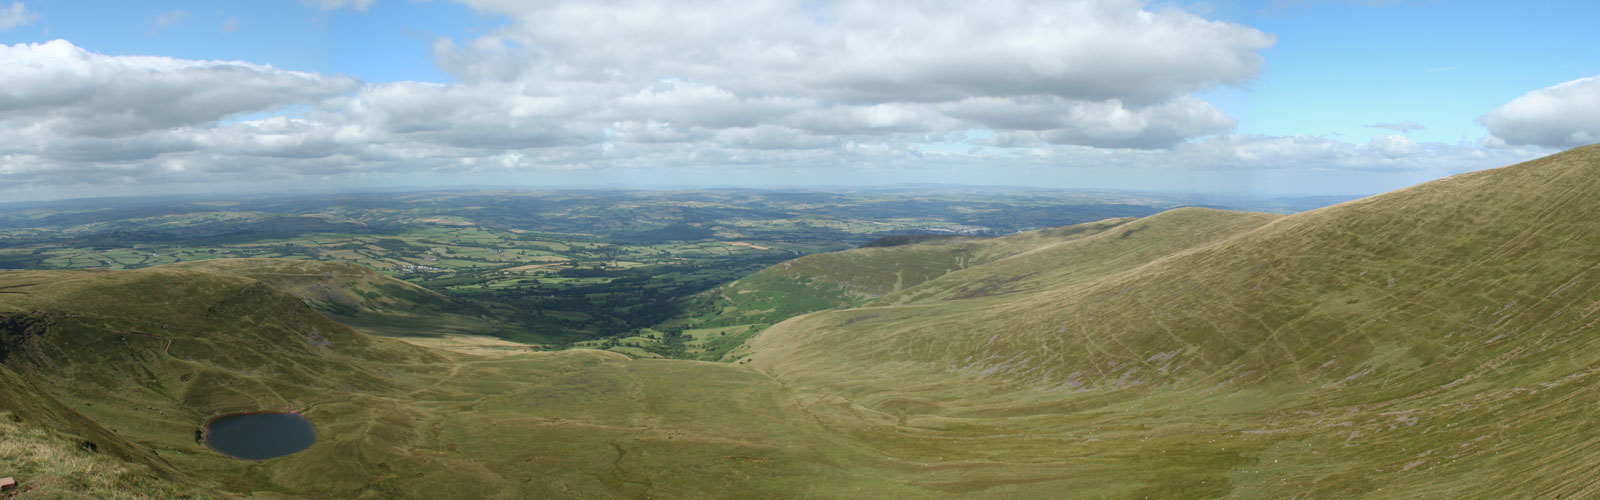 View north into Cwm Llwch from Corn Du, in the Brecon Beacons